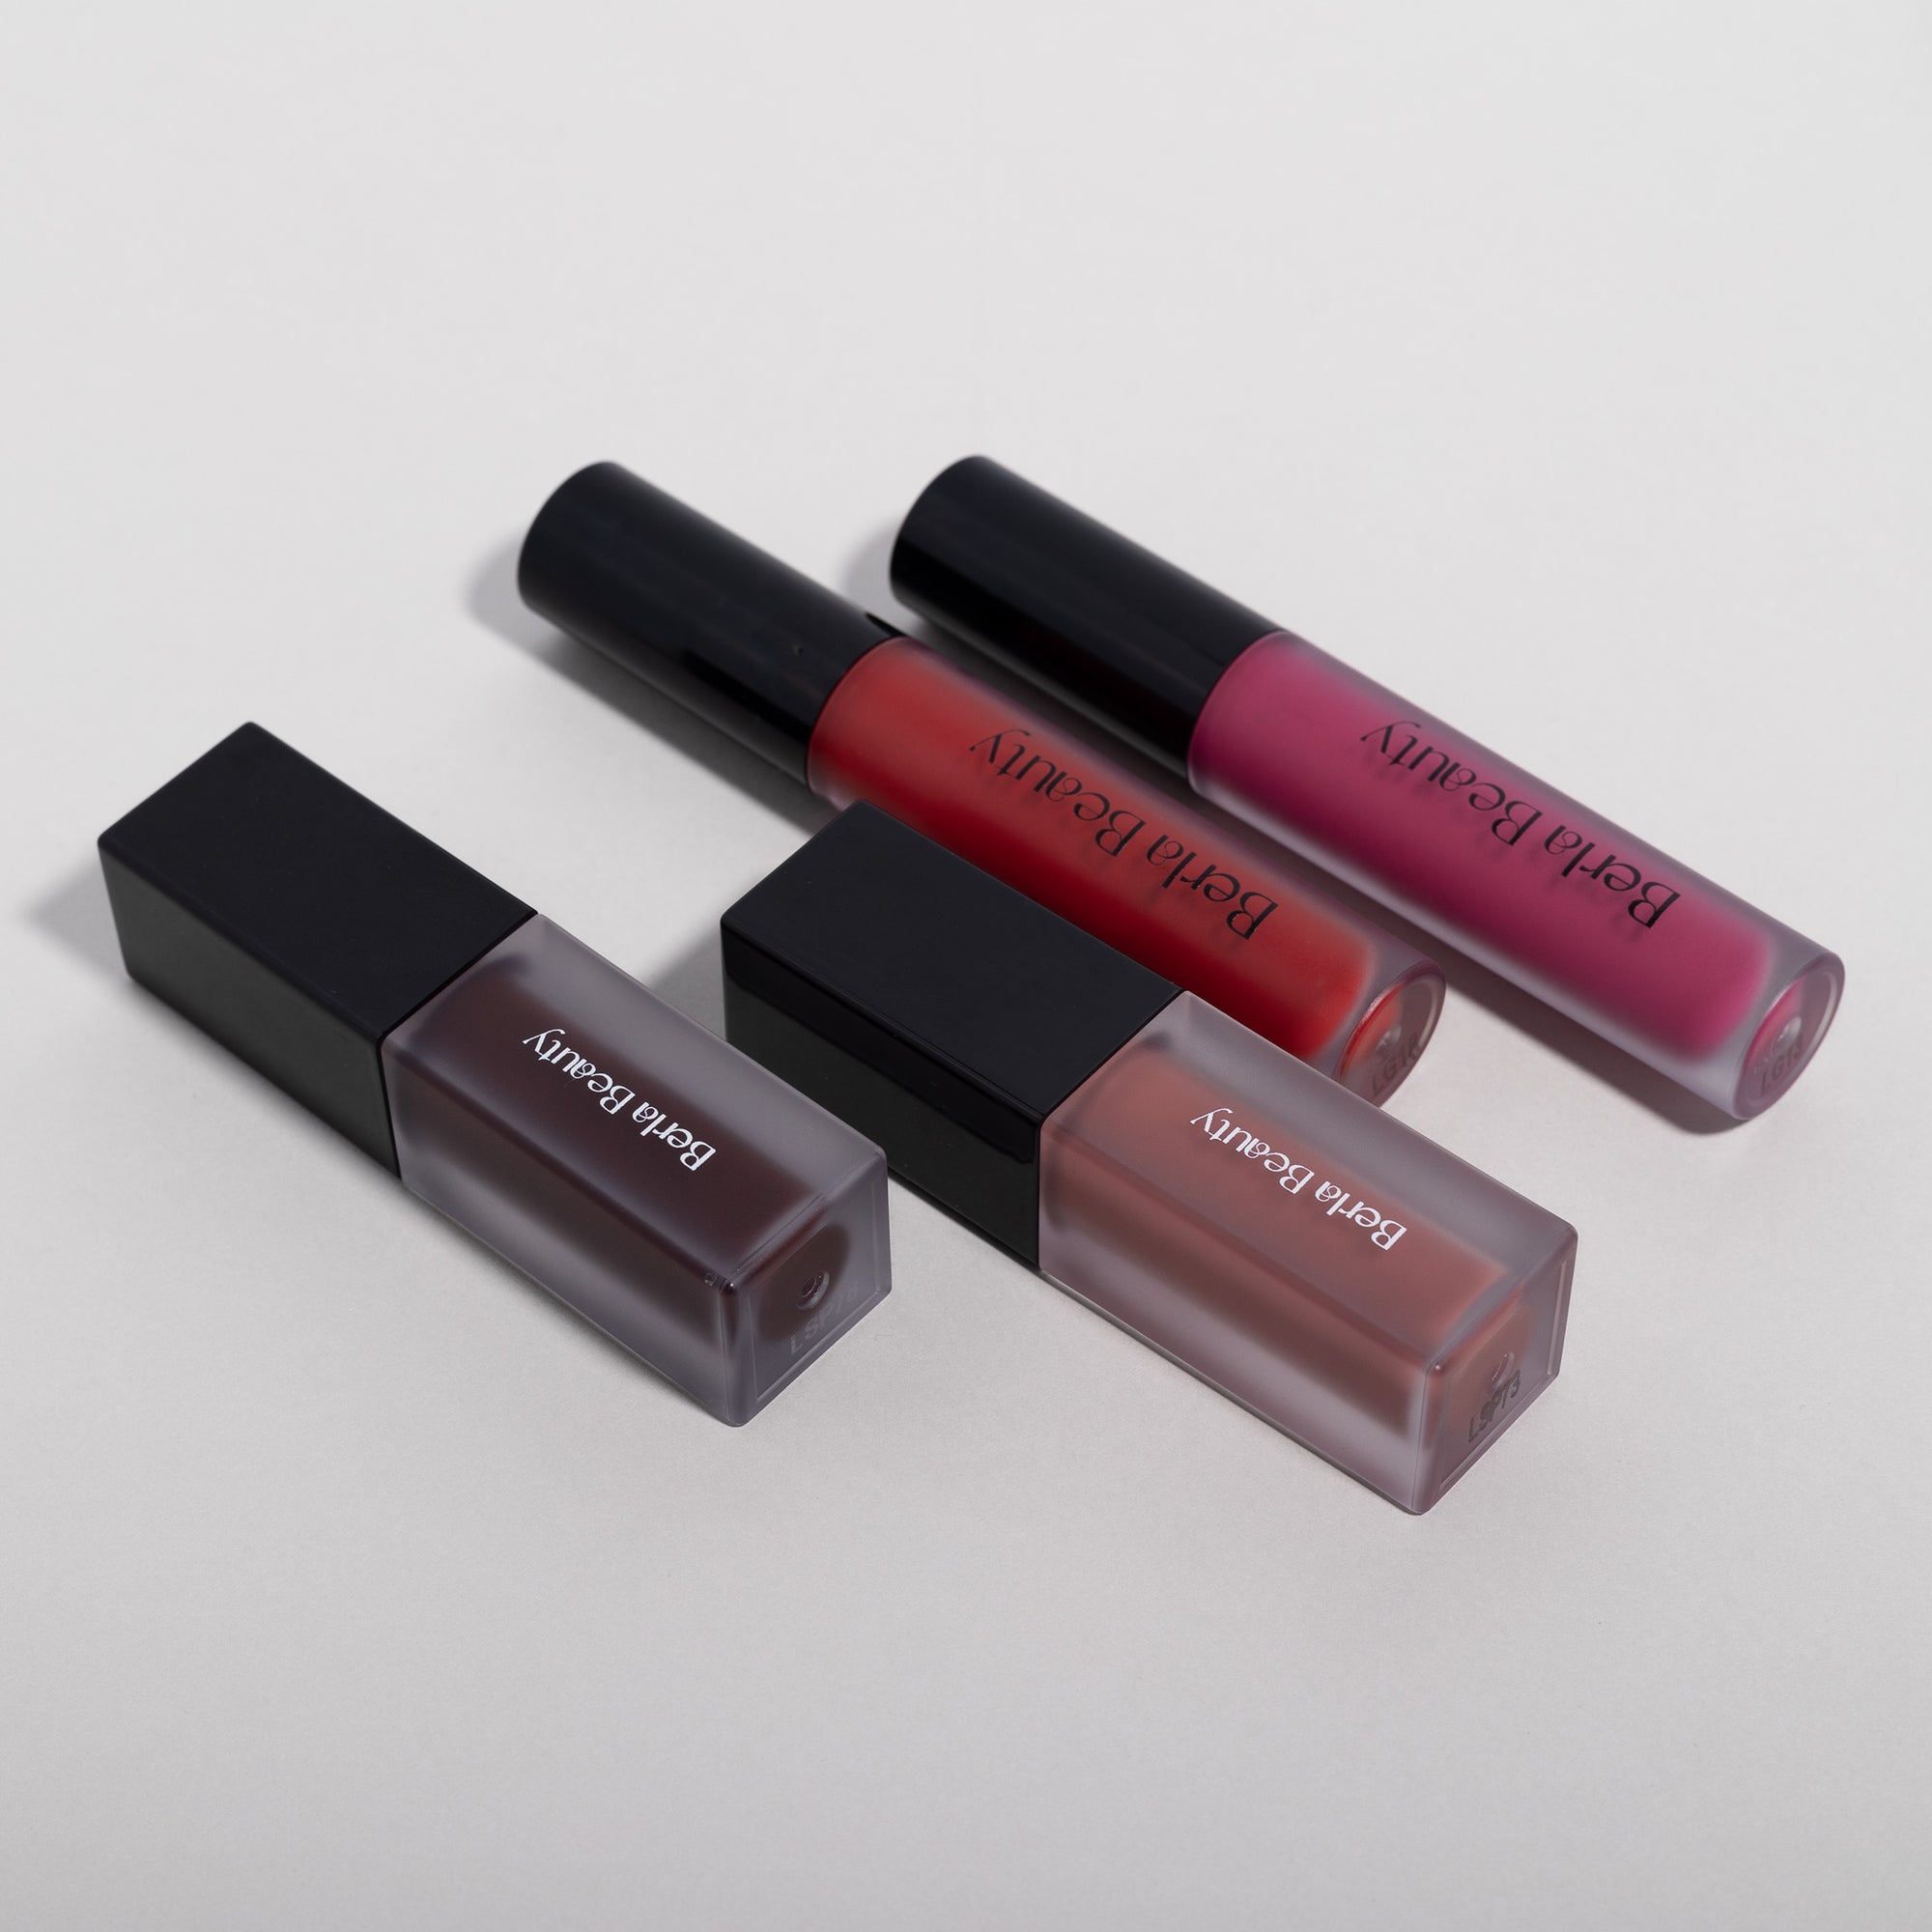 Lip Collection